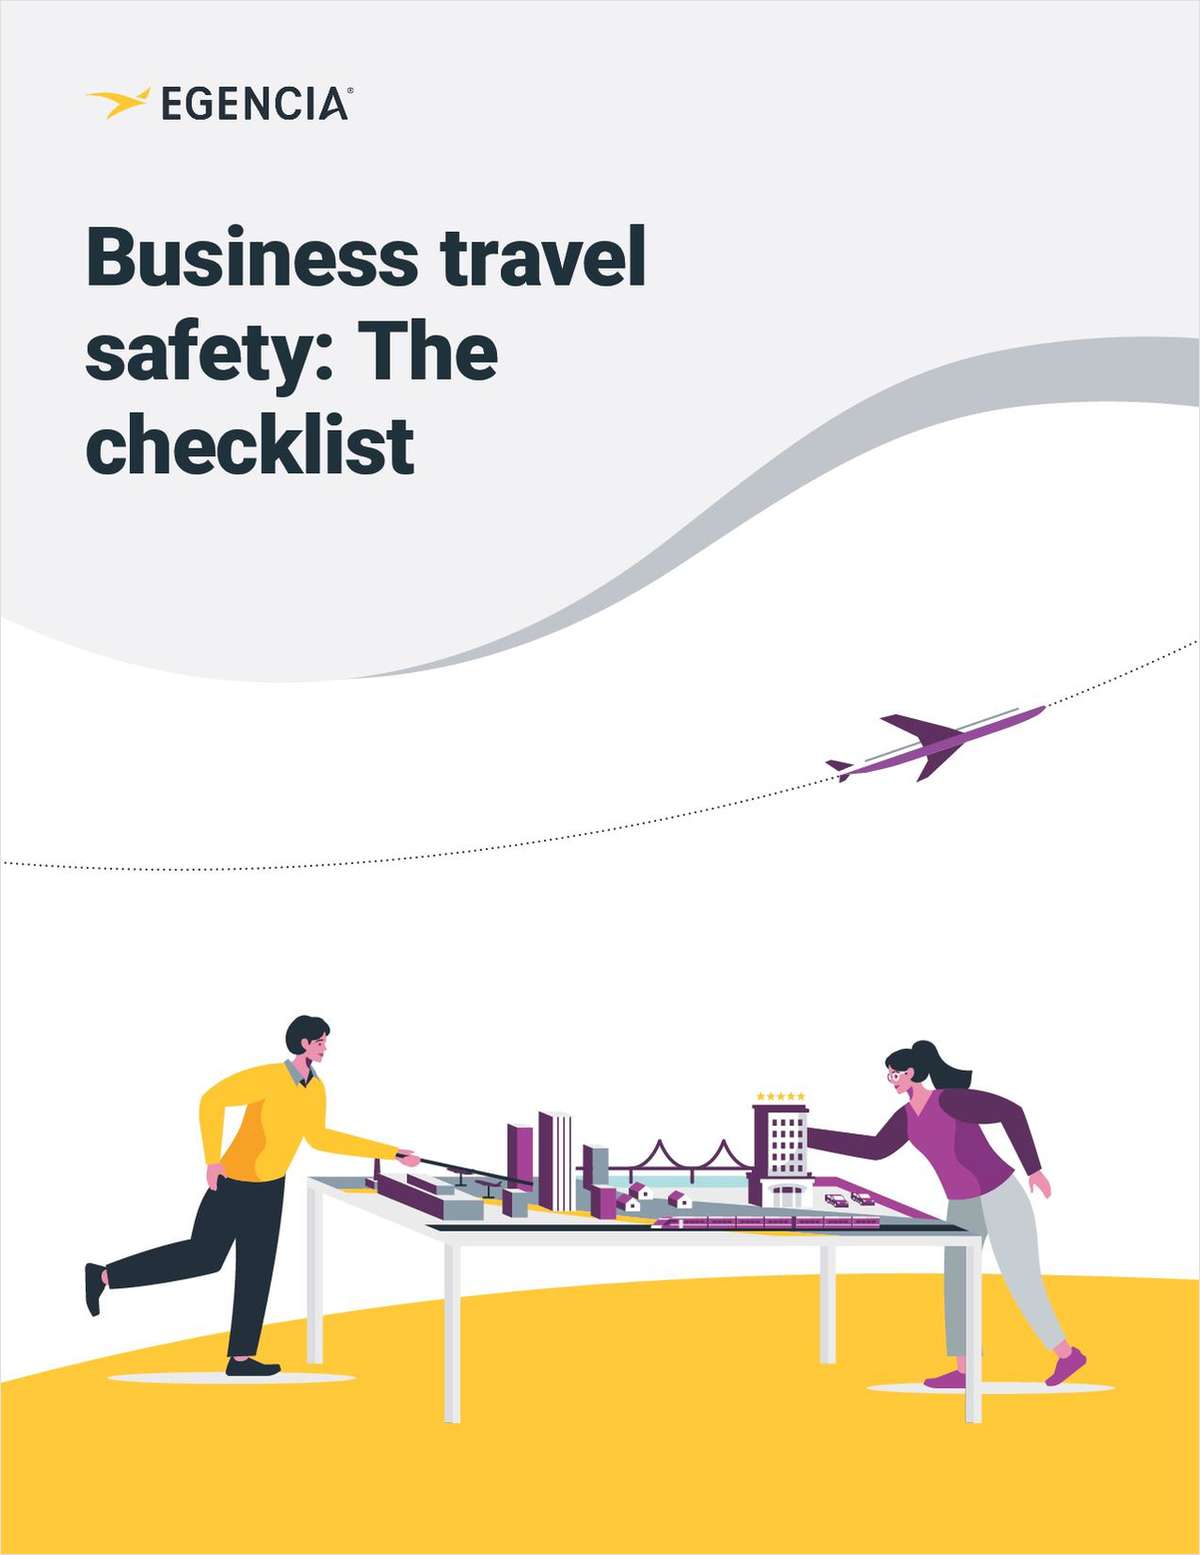 How to Improve Your Duty of Care With This Checklist for Business Travel Safety